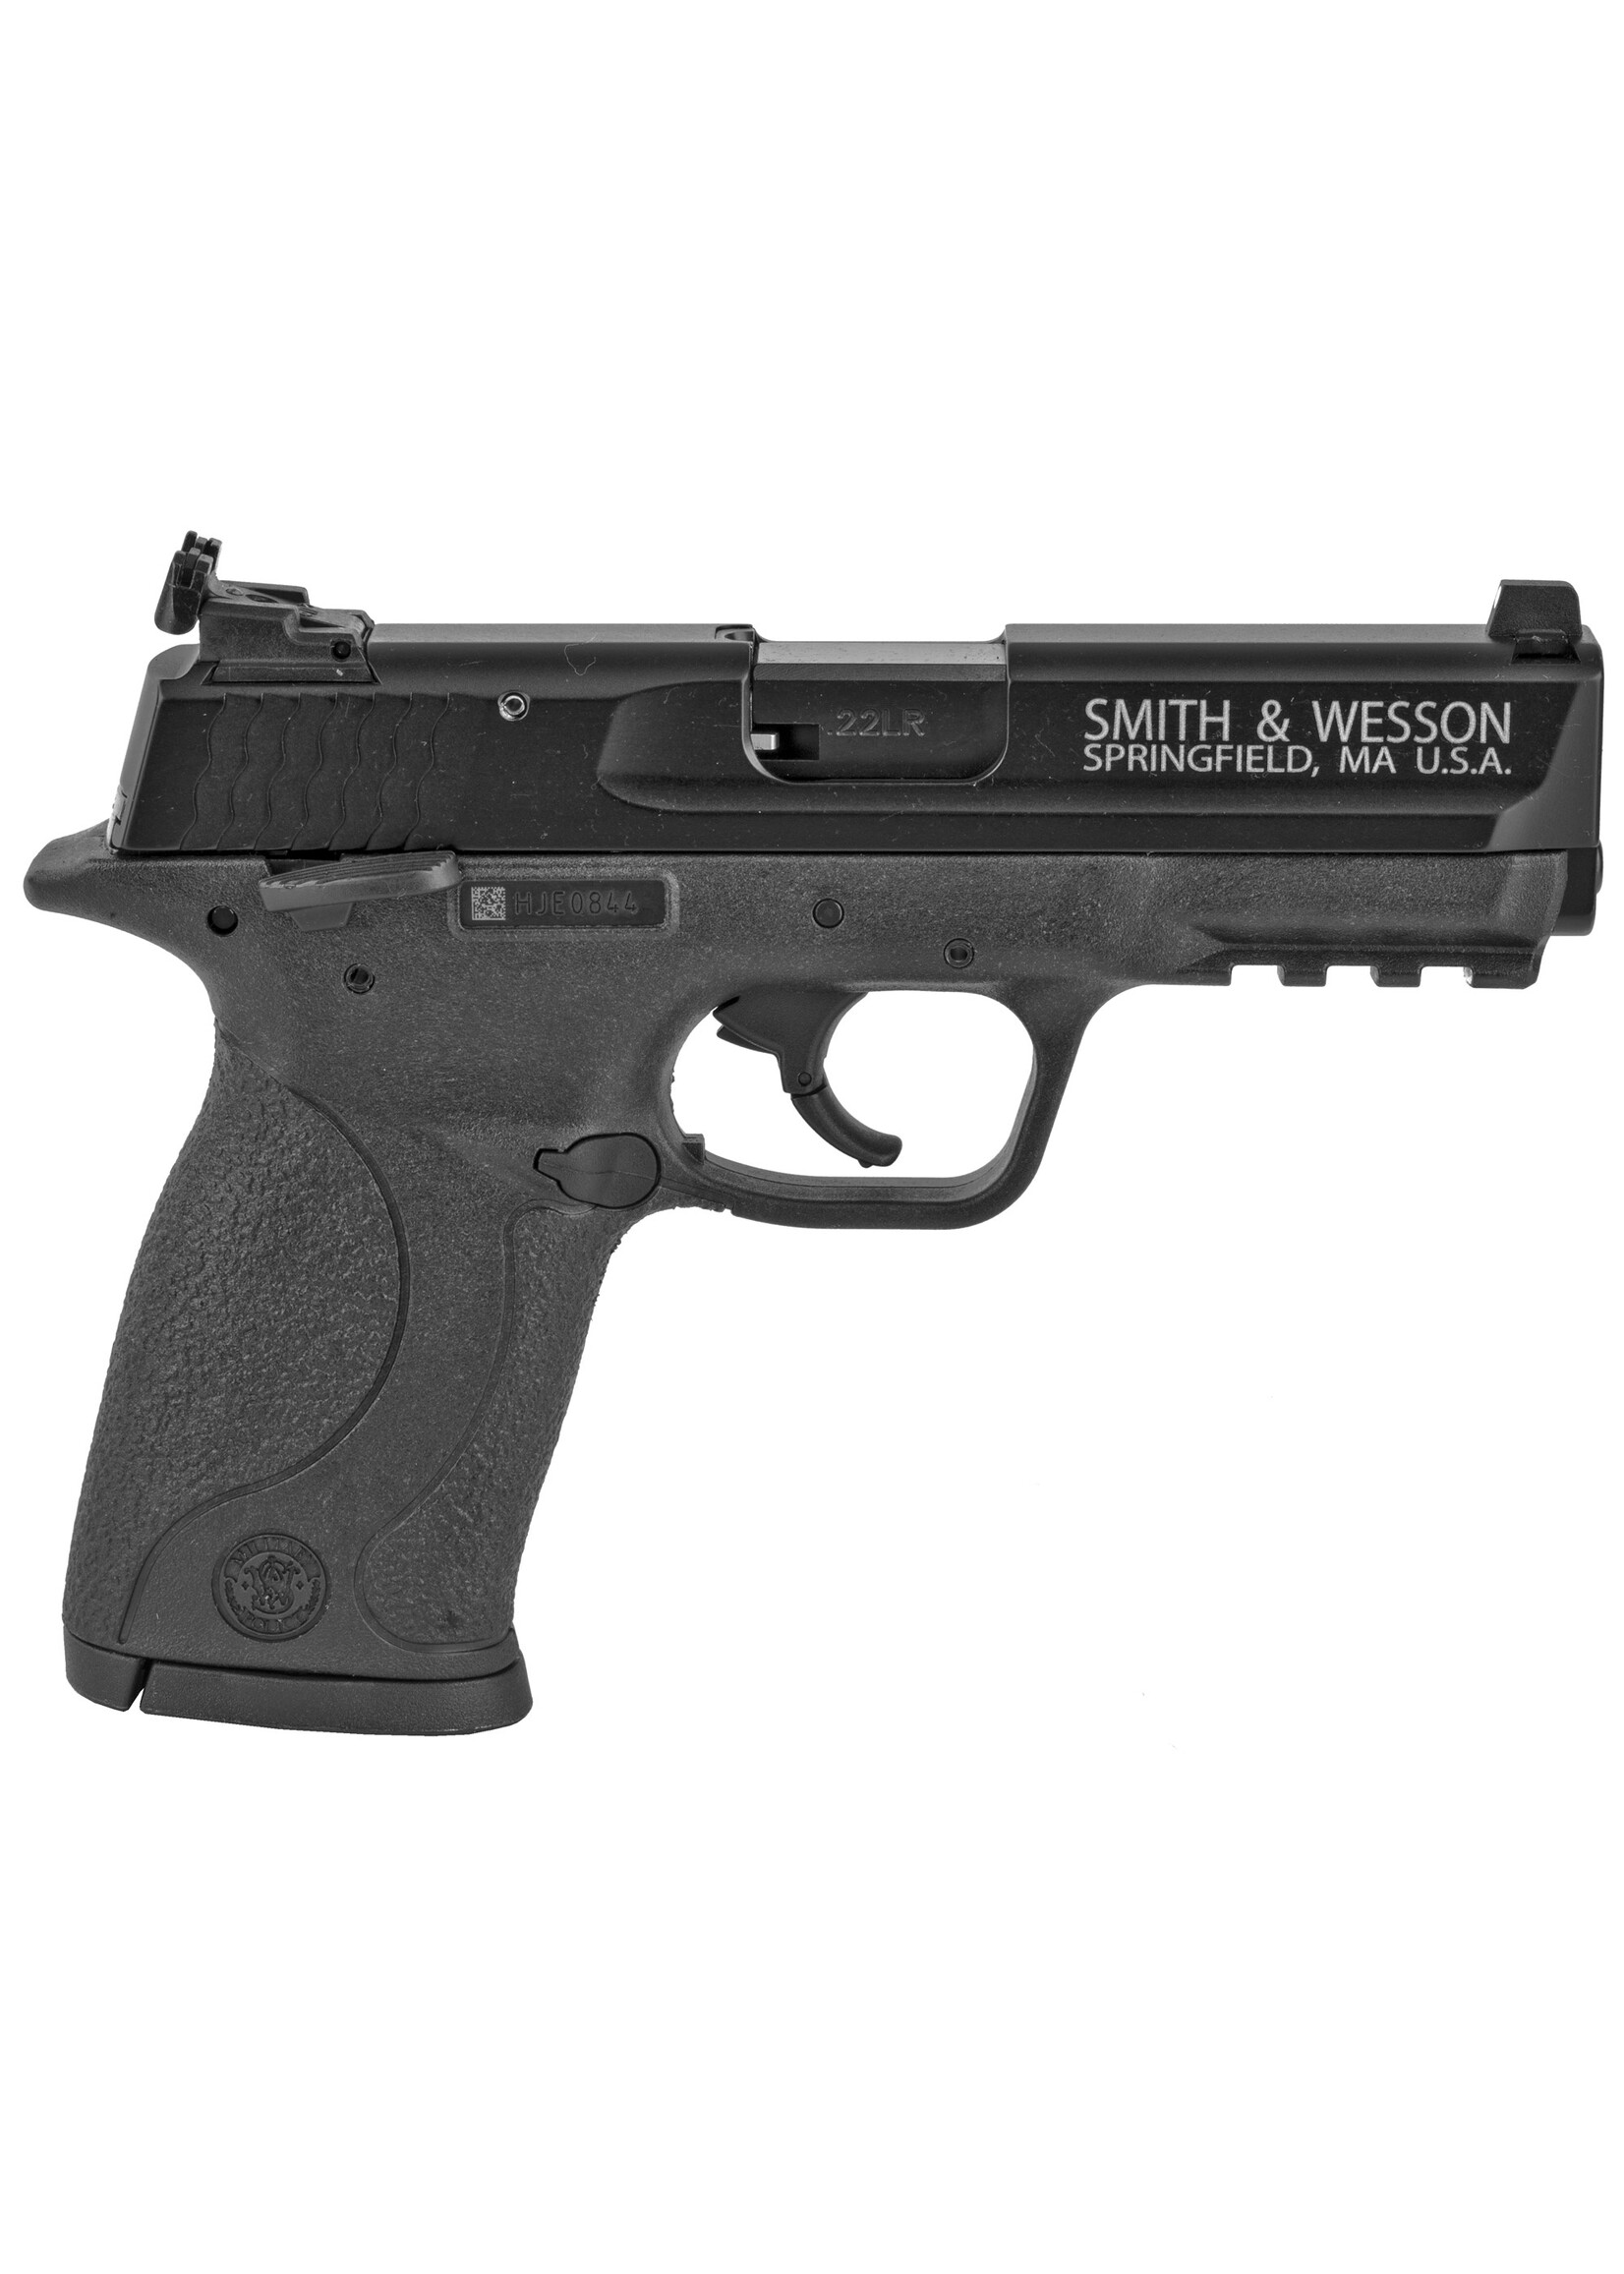 SMITH & WESSON SMITH & WESSON M&P22 COMPACT 22LR 10RD 3.5"